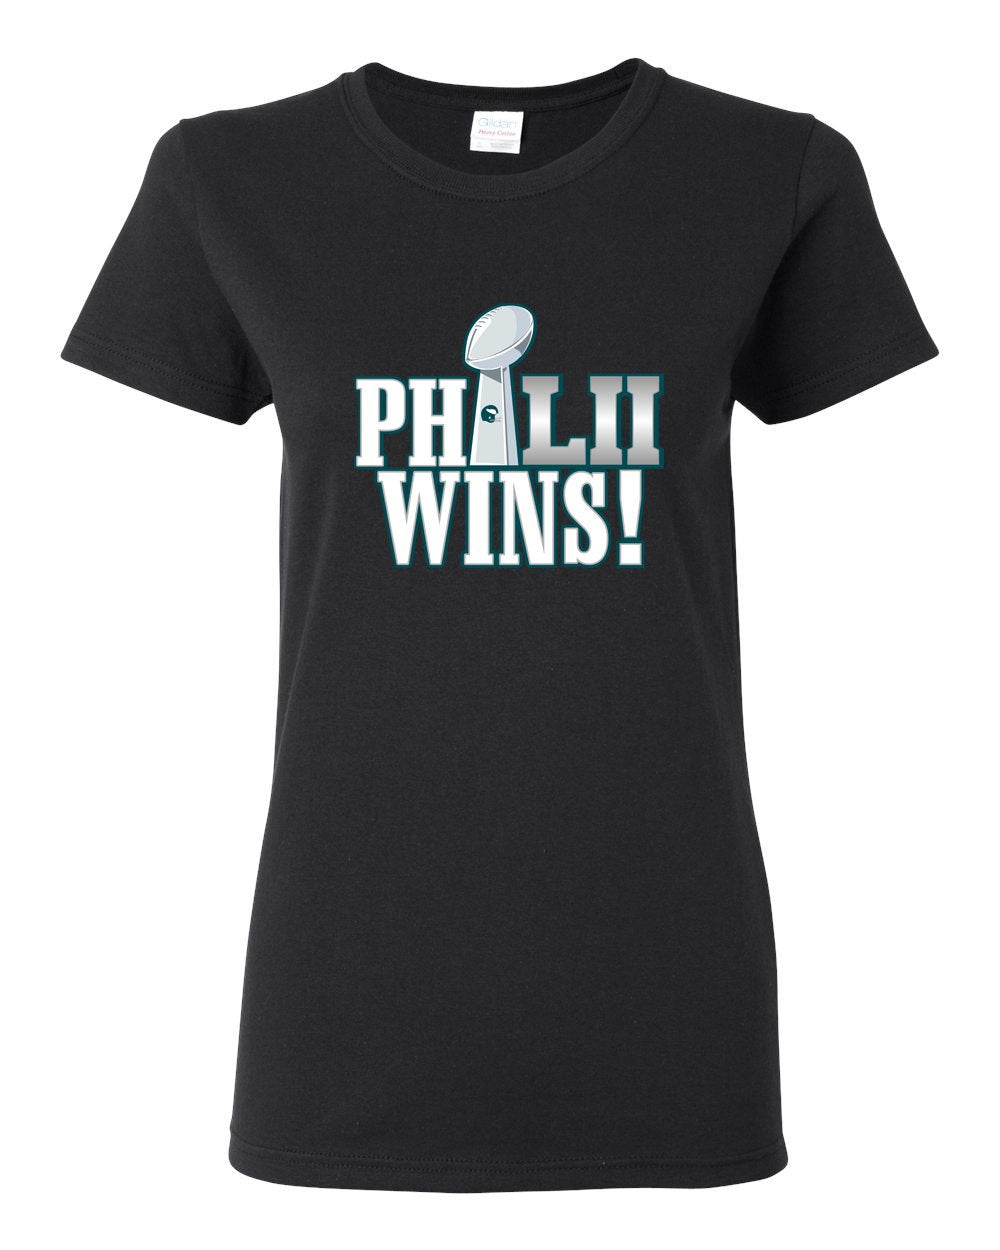 Philly Wins! LADIES Missy-Fit T-Shirt